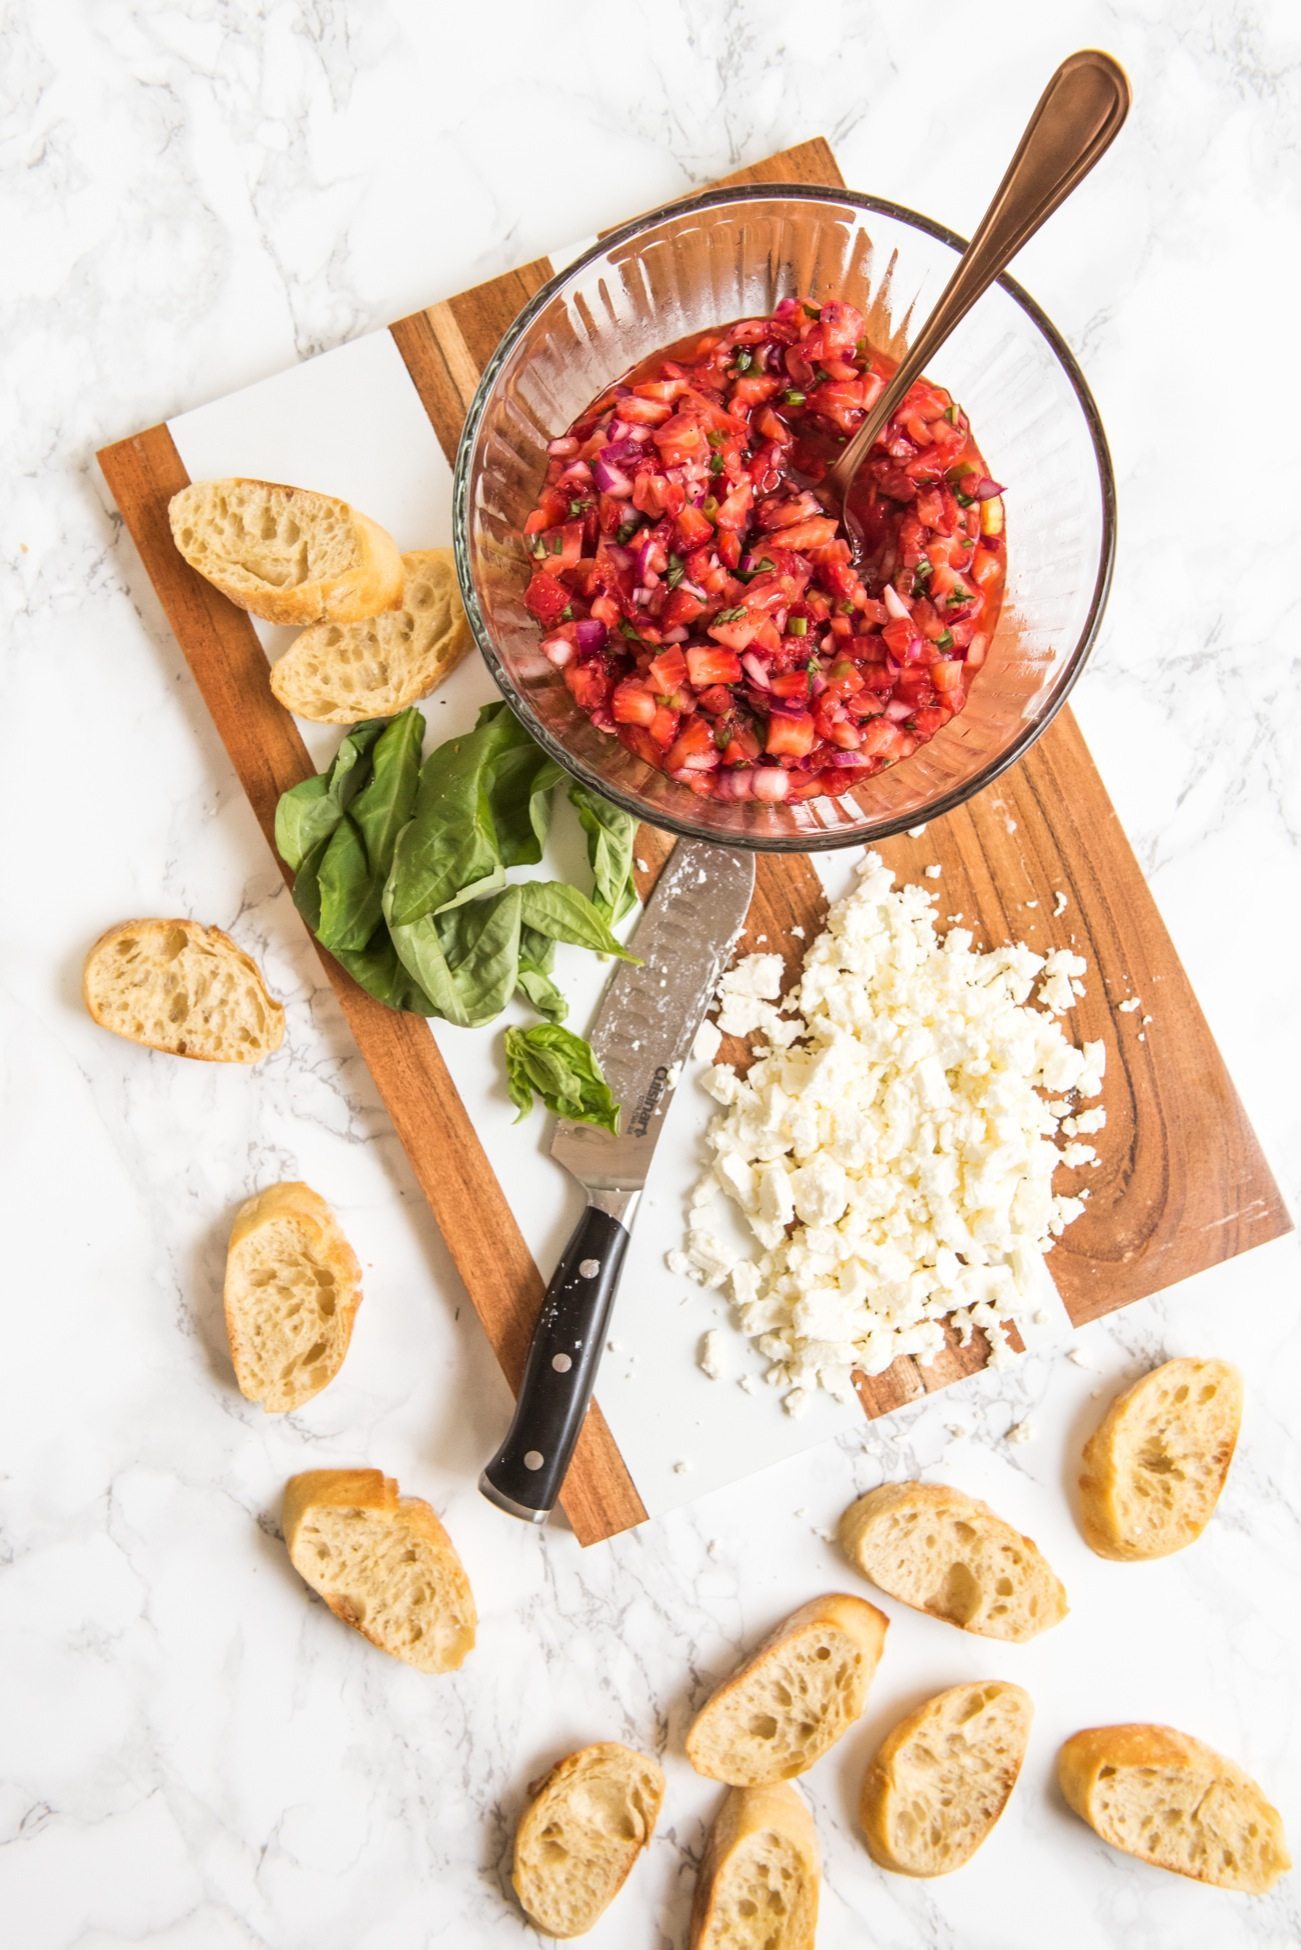 Strawberry Feta Bruschetta Recipe | Entertaining ideas, party appetizers, cocktail recipes, party ideas and more from @cydconverse